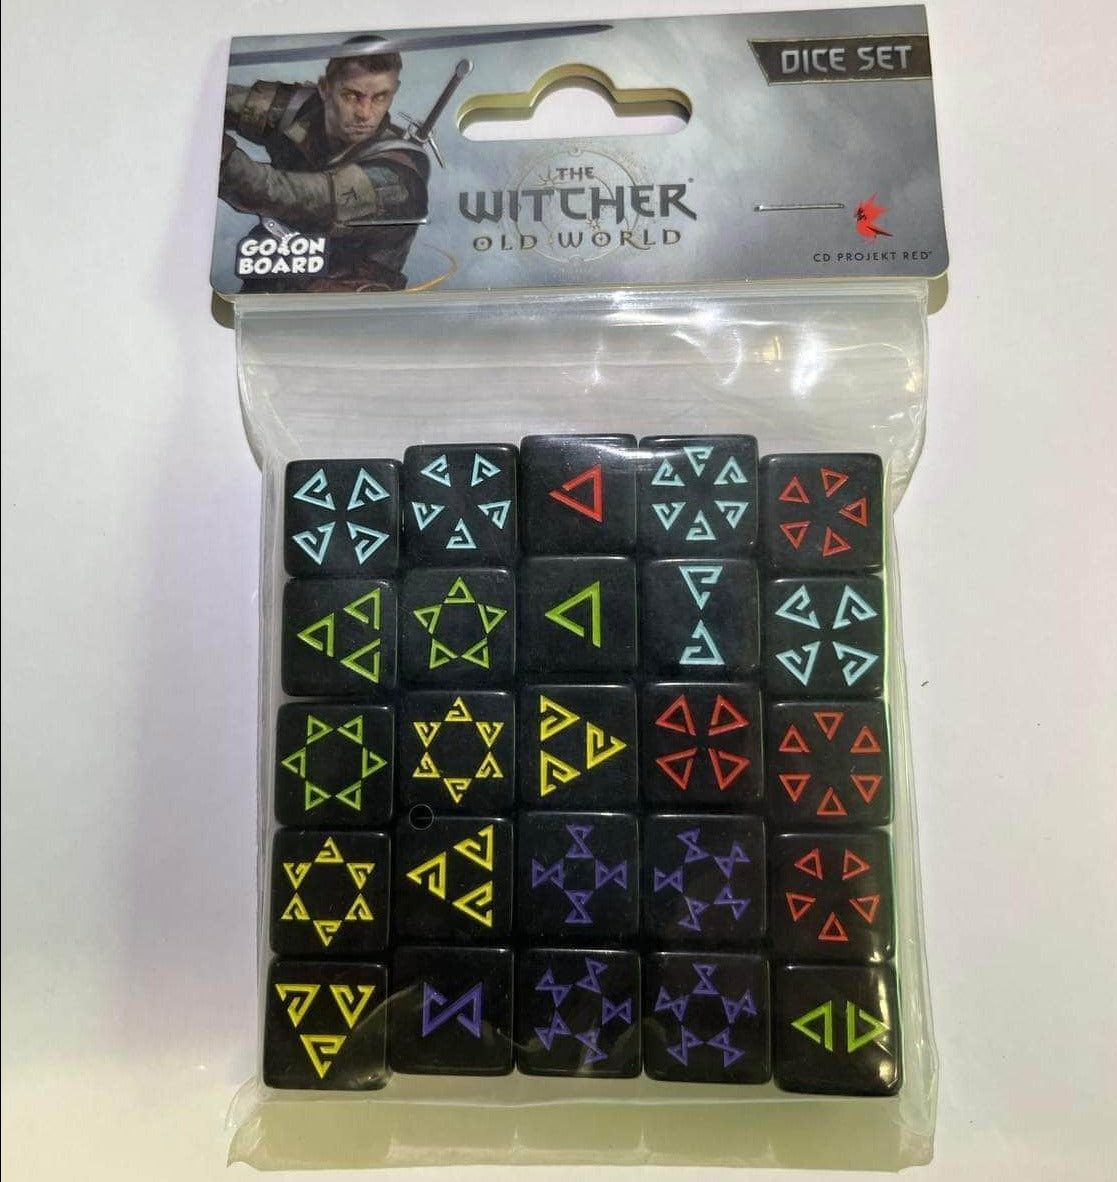 The Witcher: Weld World 25 Set Dice Set (Kickstarter Special Special) Go On Board KS001114A